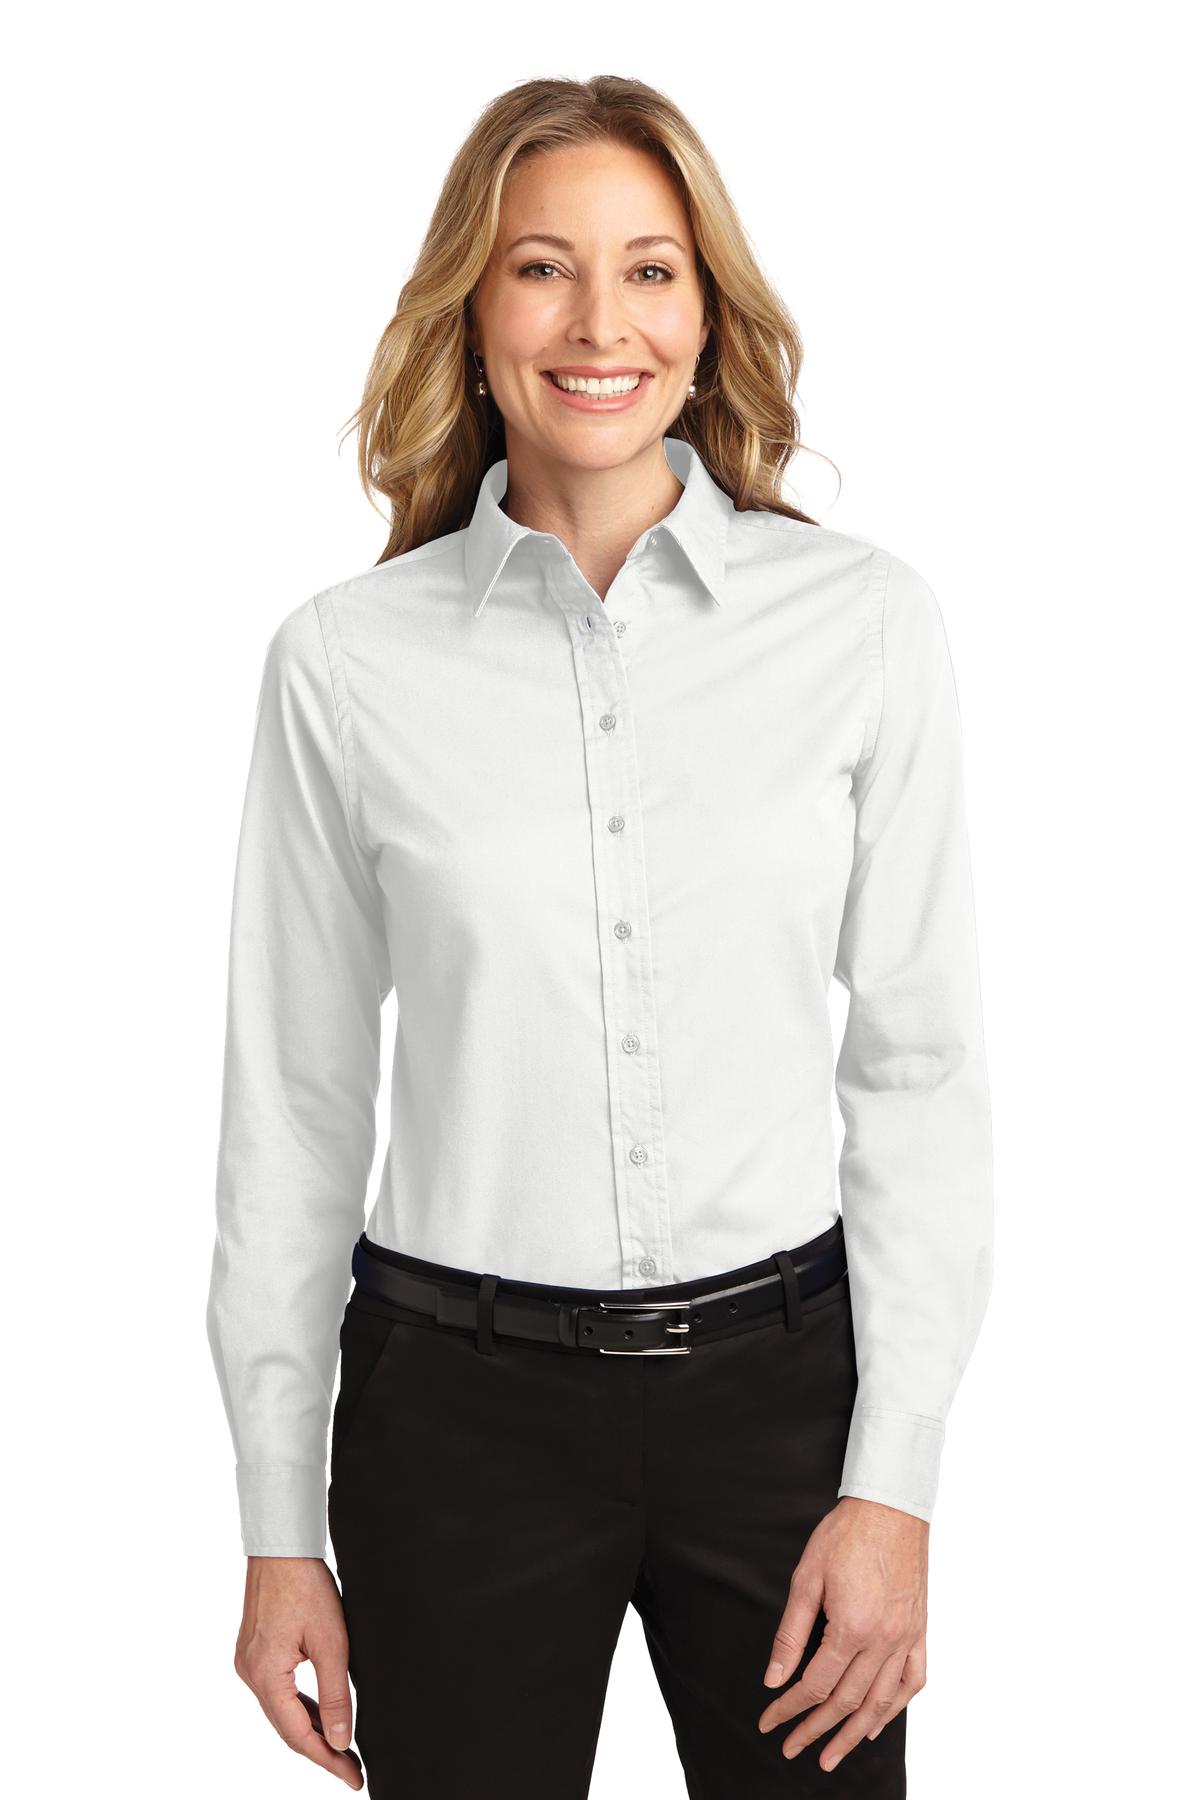 Port Authority Ladies Long Sleeve Easy Care Shirt - image 1 of 1